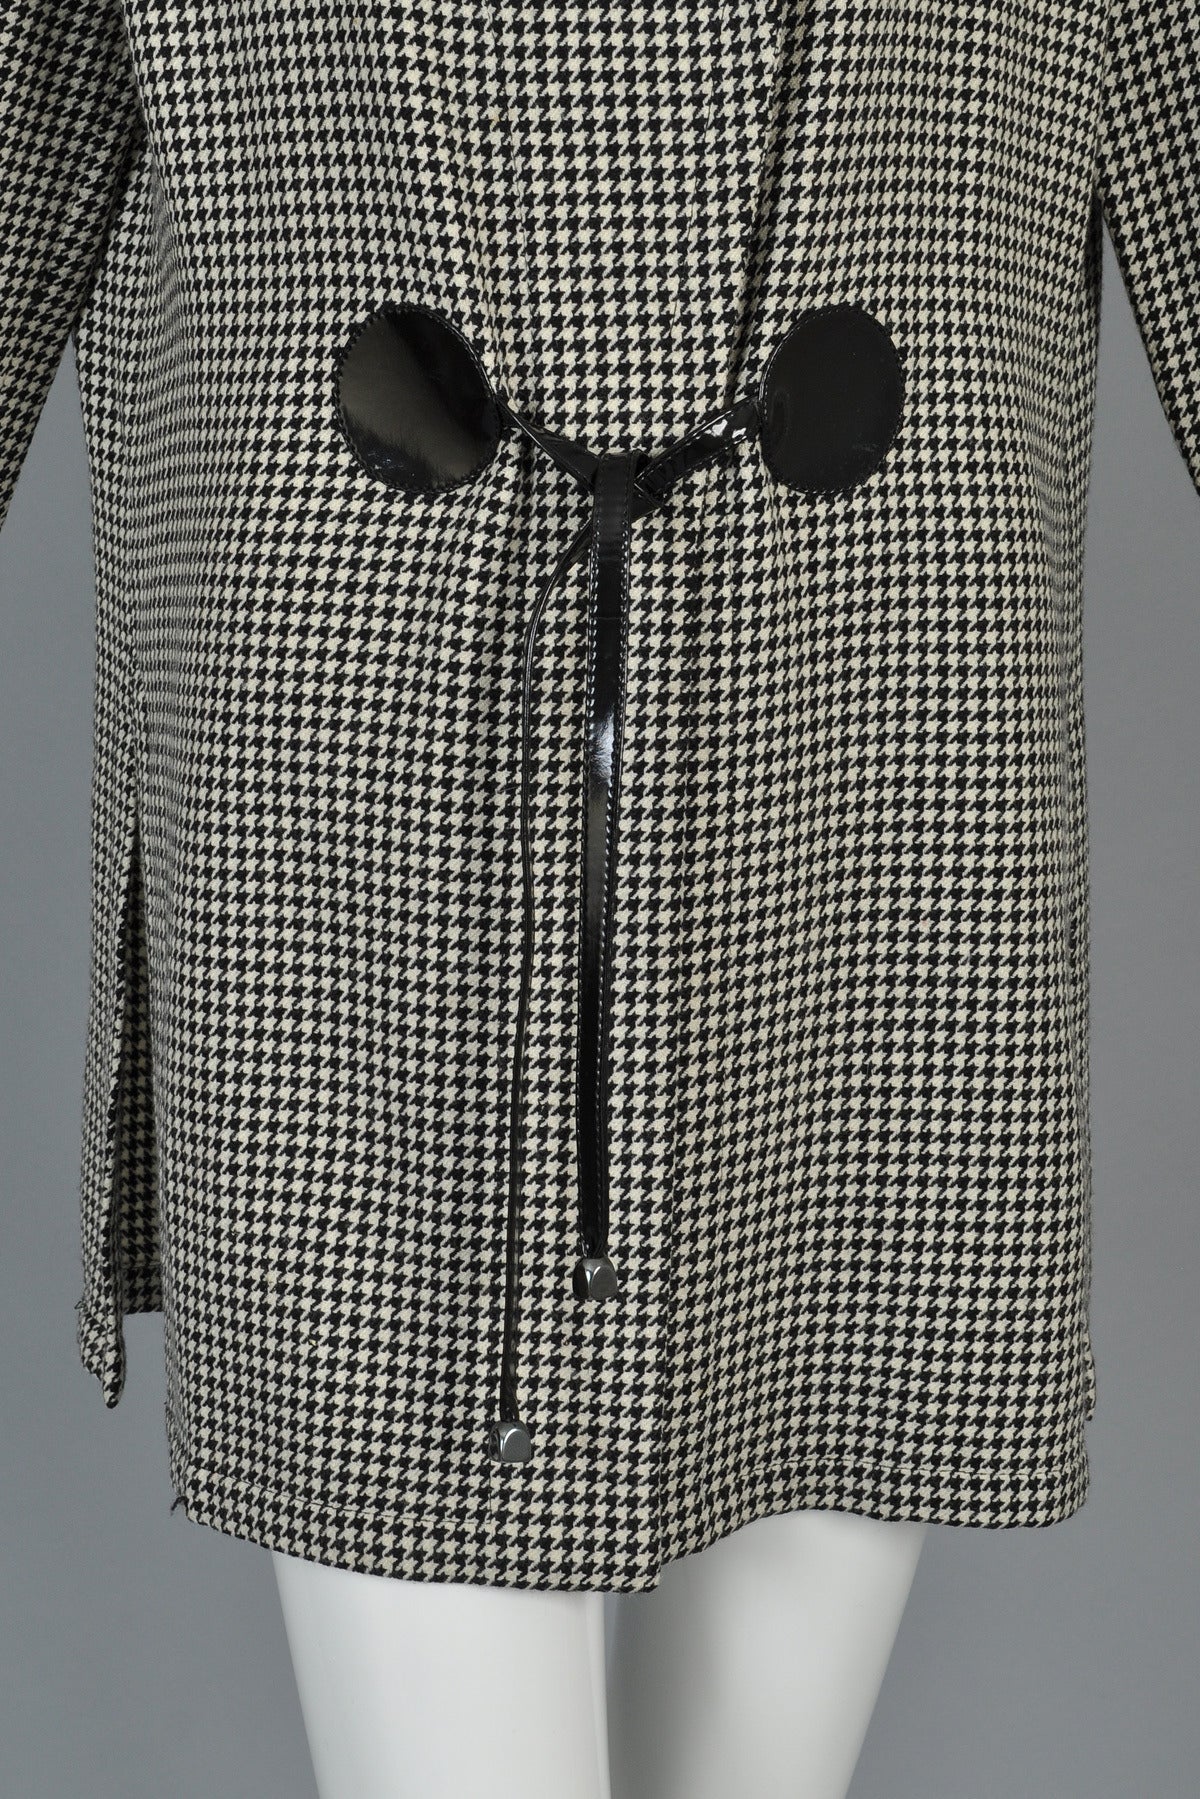 F/W 93 Pierre Cardin Haute Couture Houndstooth Vinyl Tie Jacket In Excellent Condition For Sale In Yucca Valley, CA